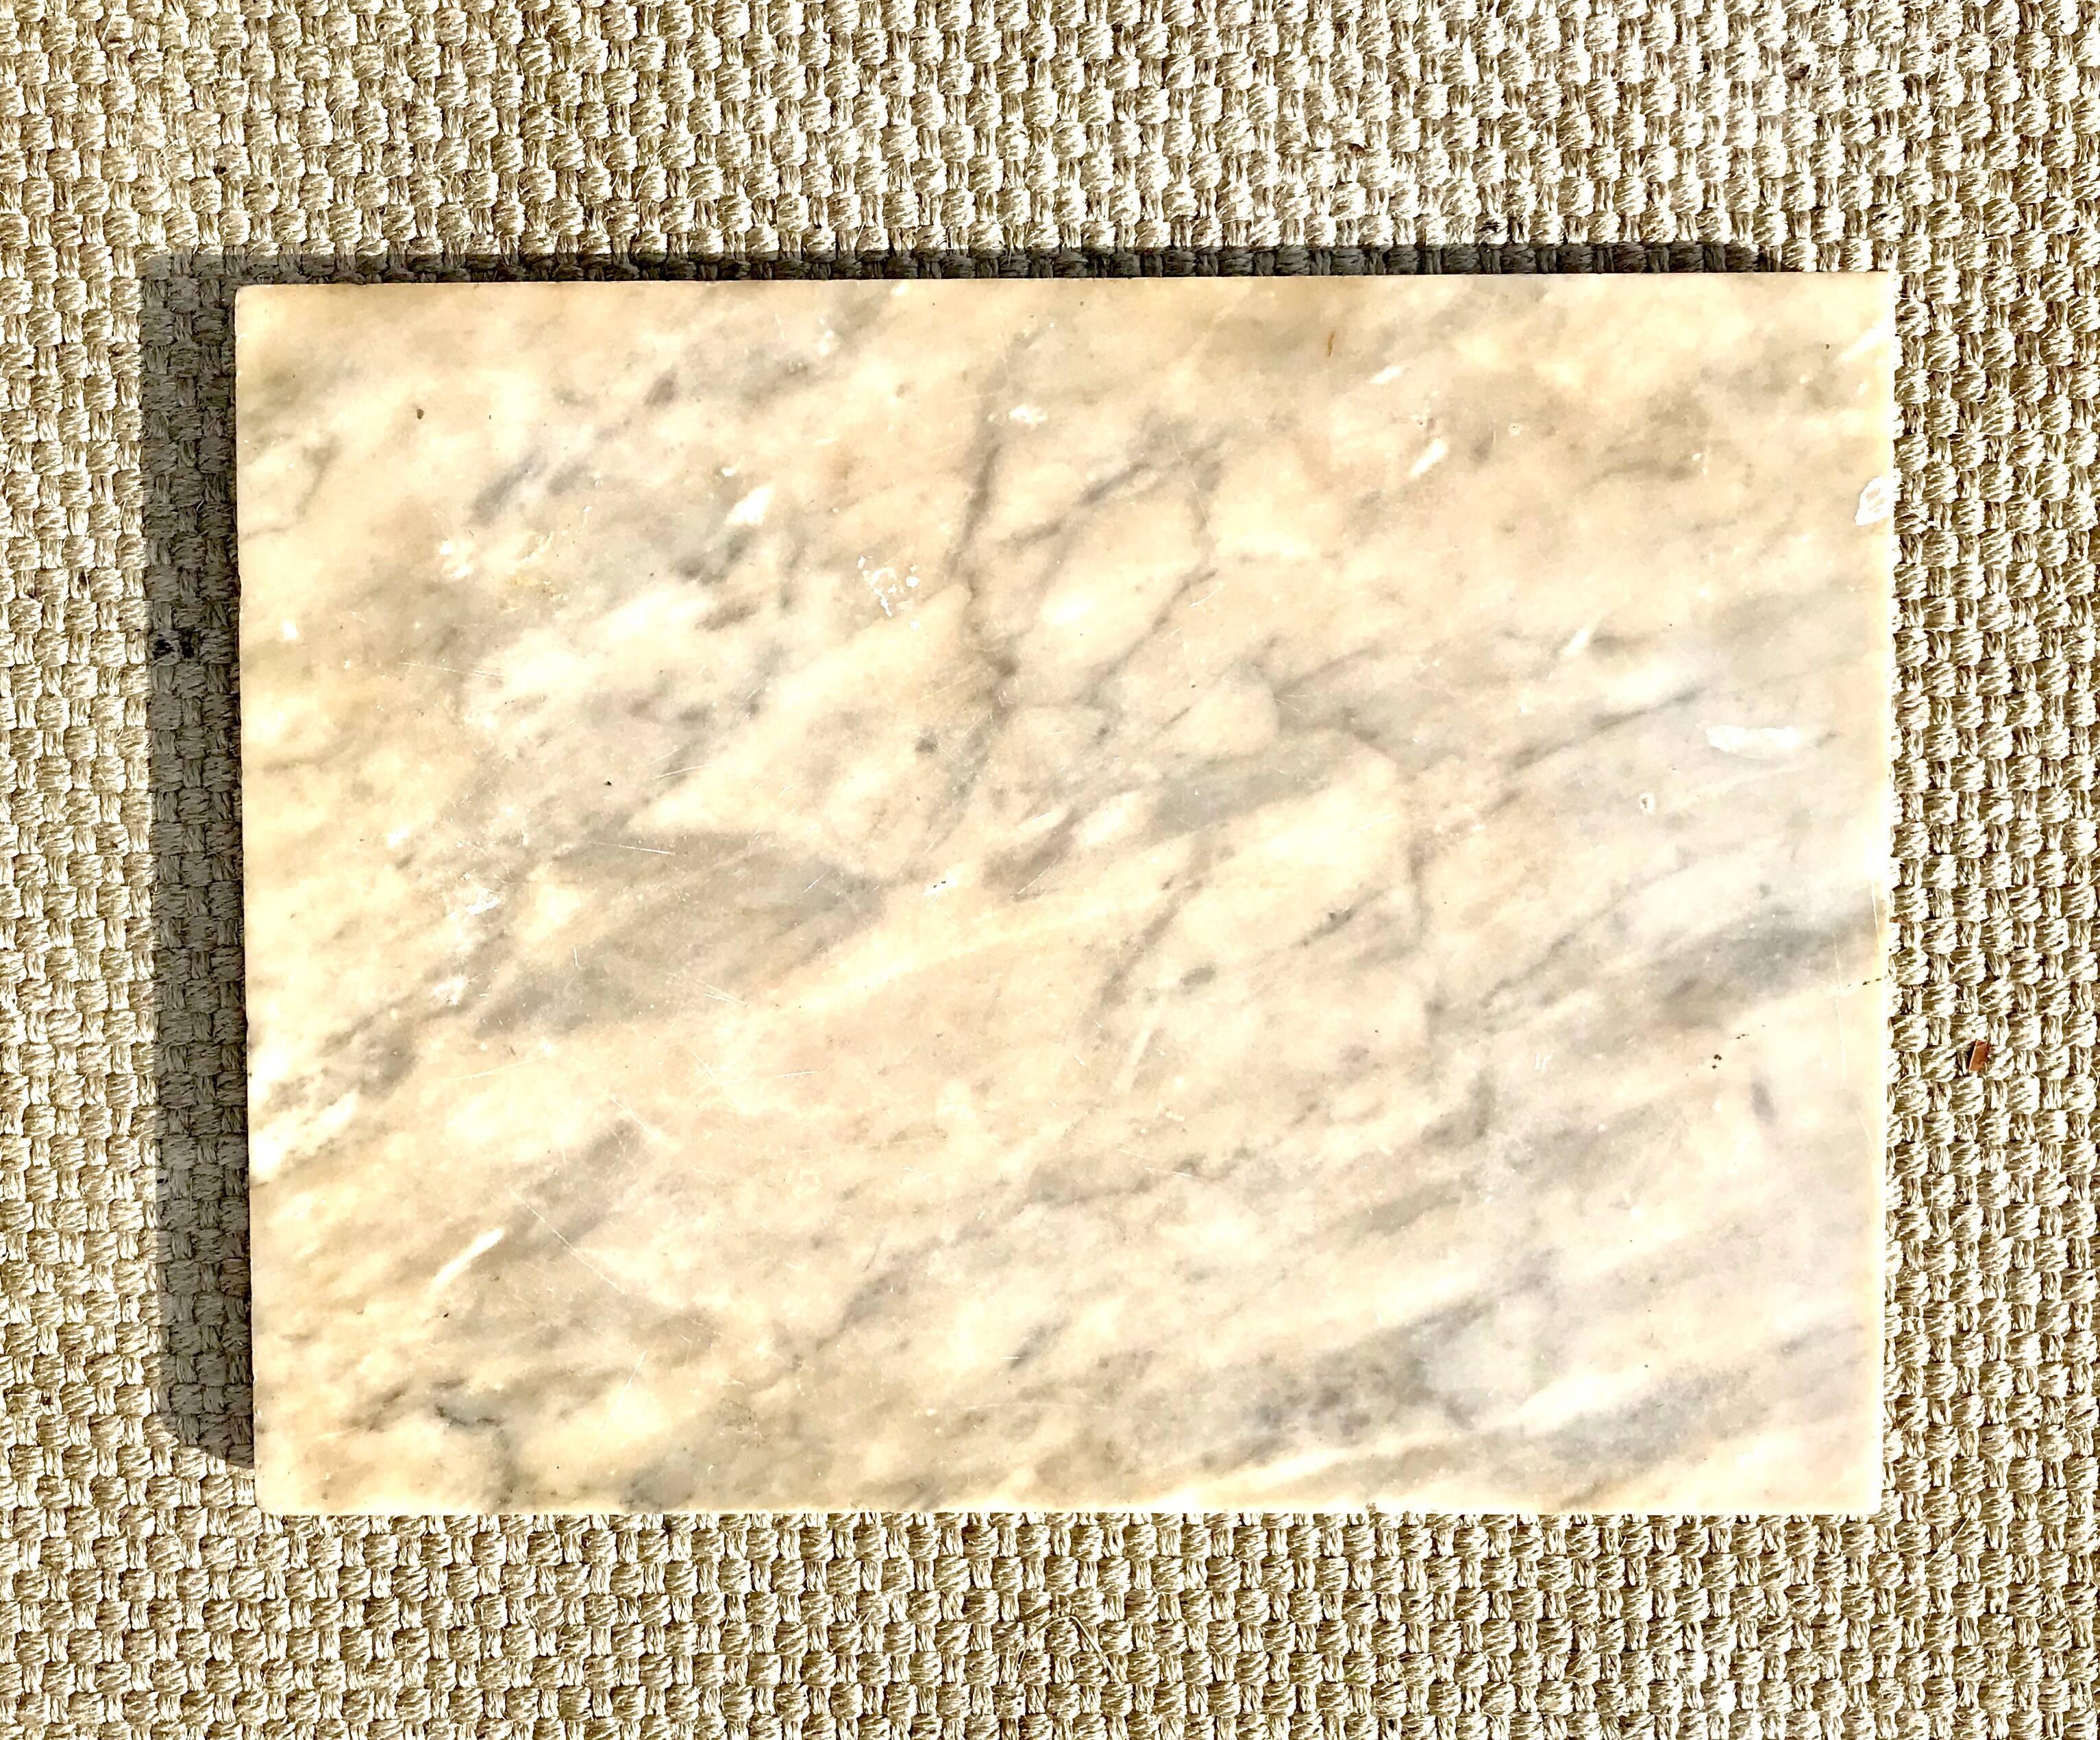 A rectangular lazy Susan of antique Carrara marble. The patinated and smooth stone adds warmth when used on a kitchen island as a condiment and or spice depot.